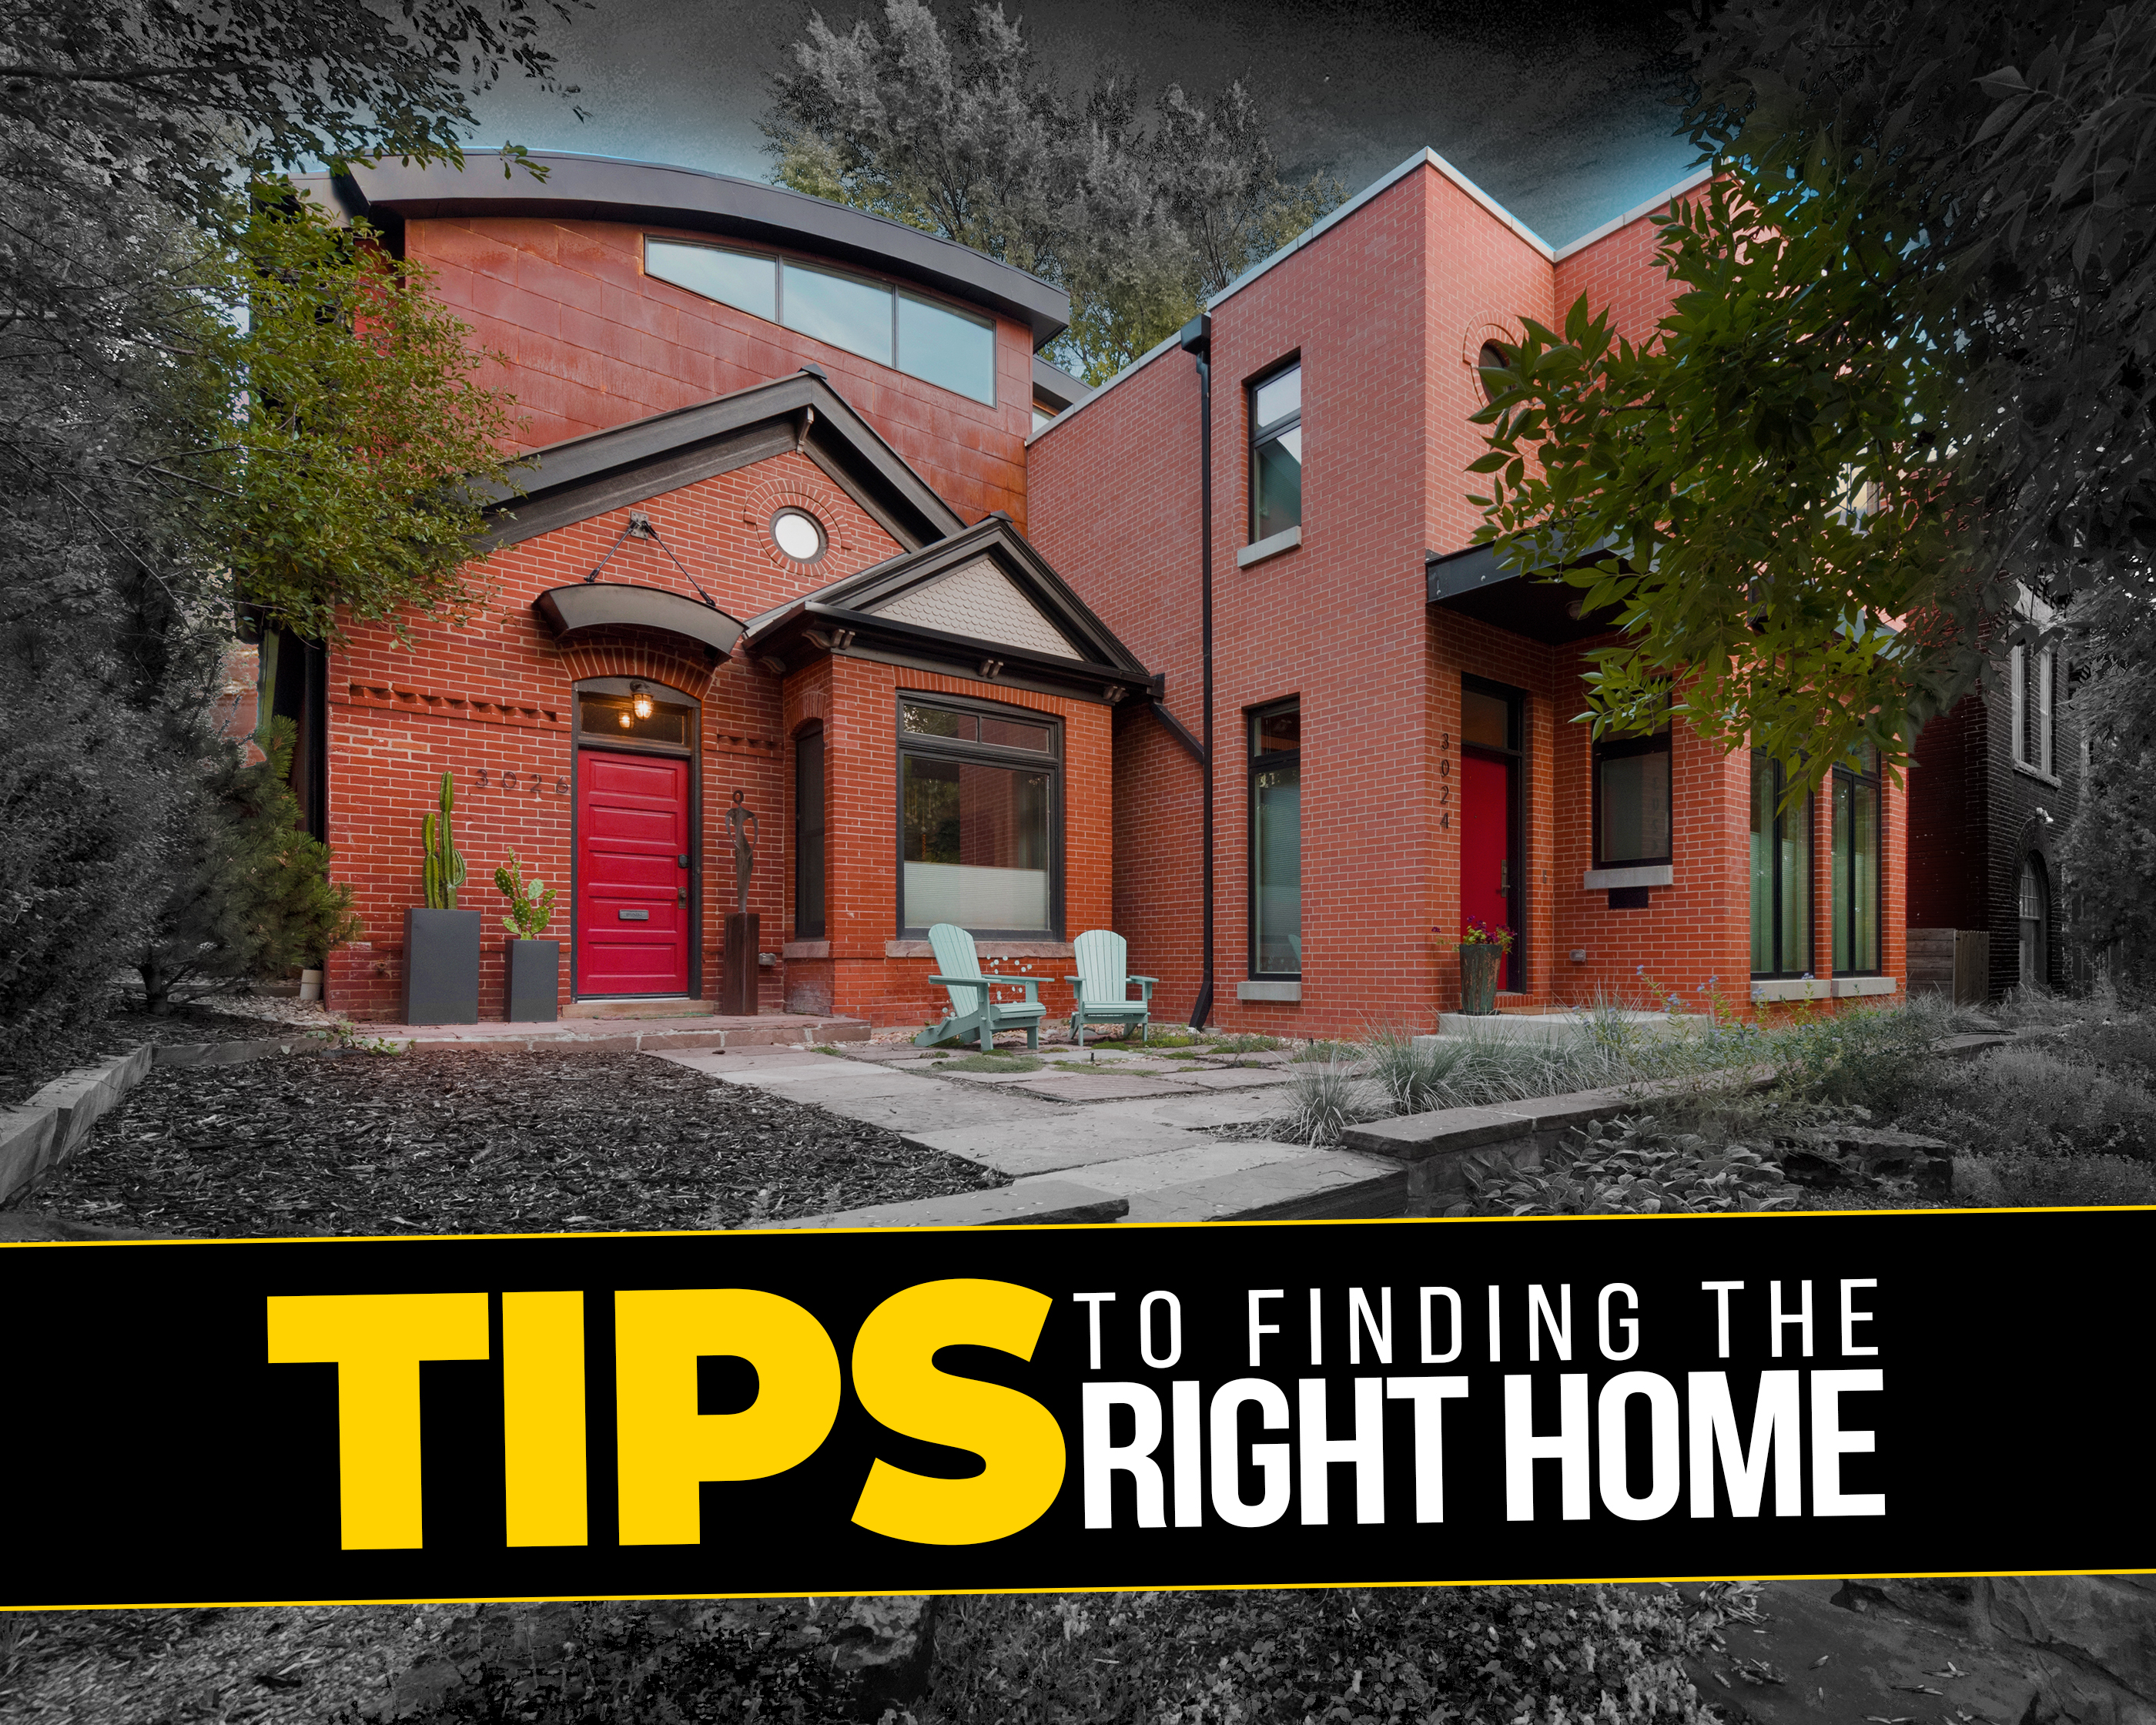 Tips to Find the Right Home